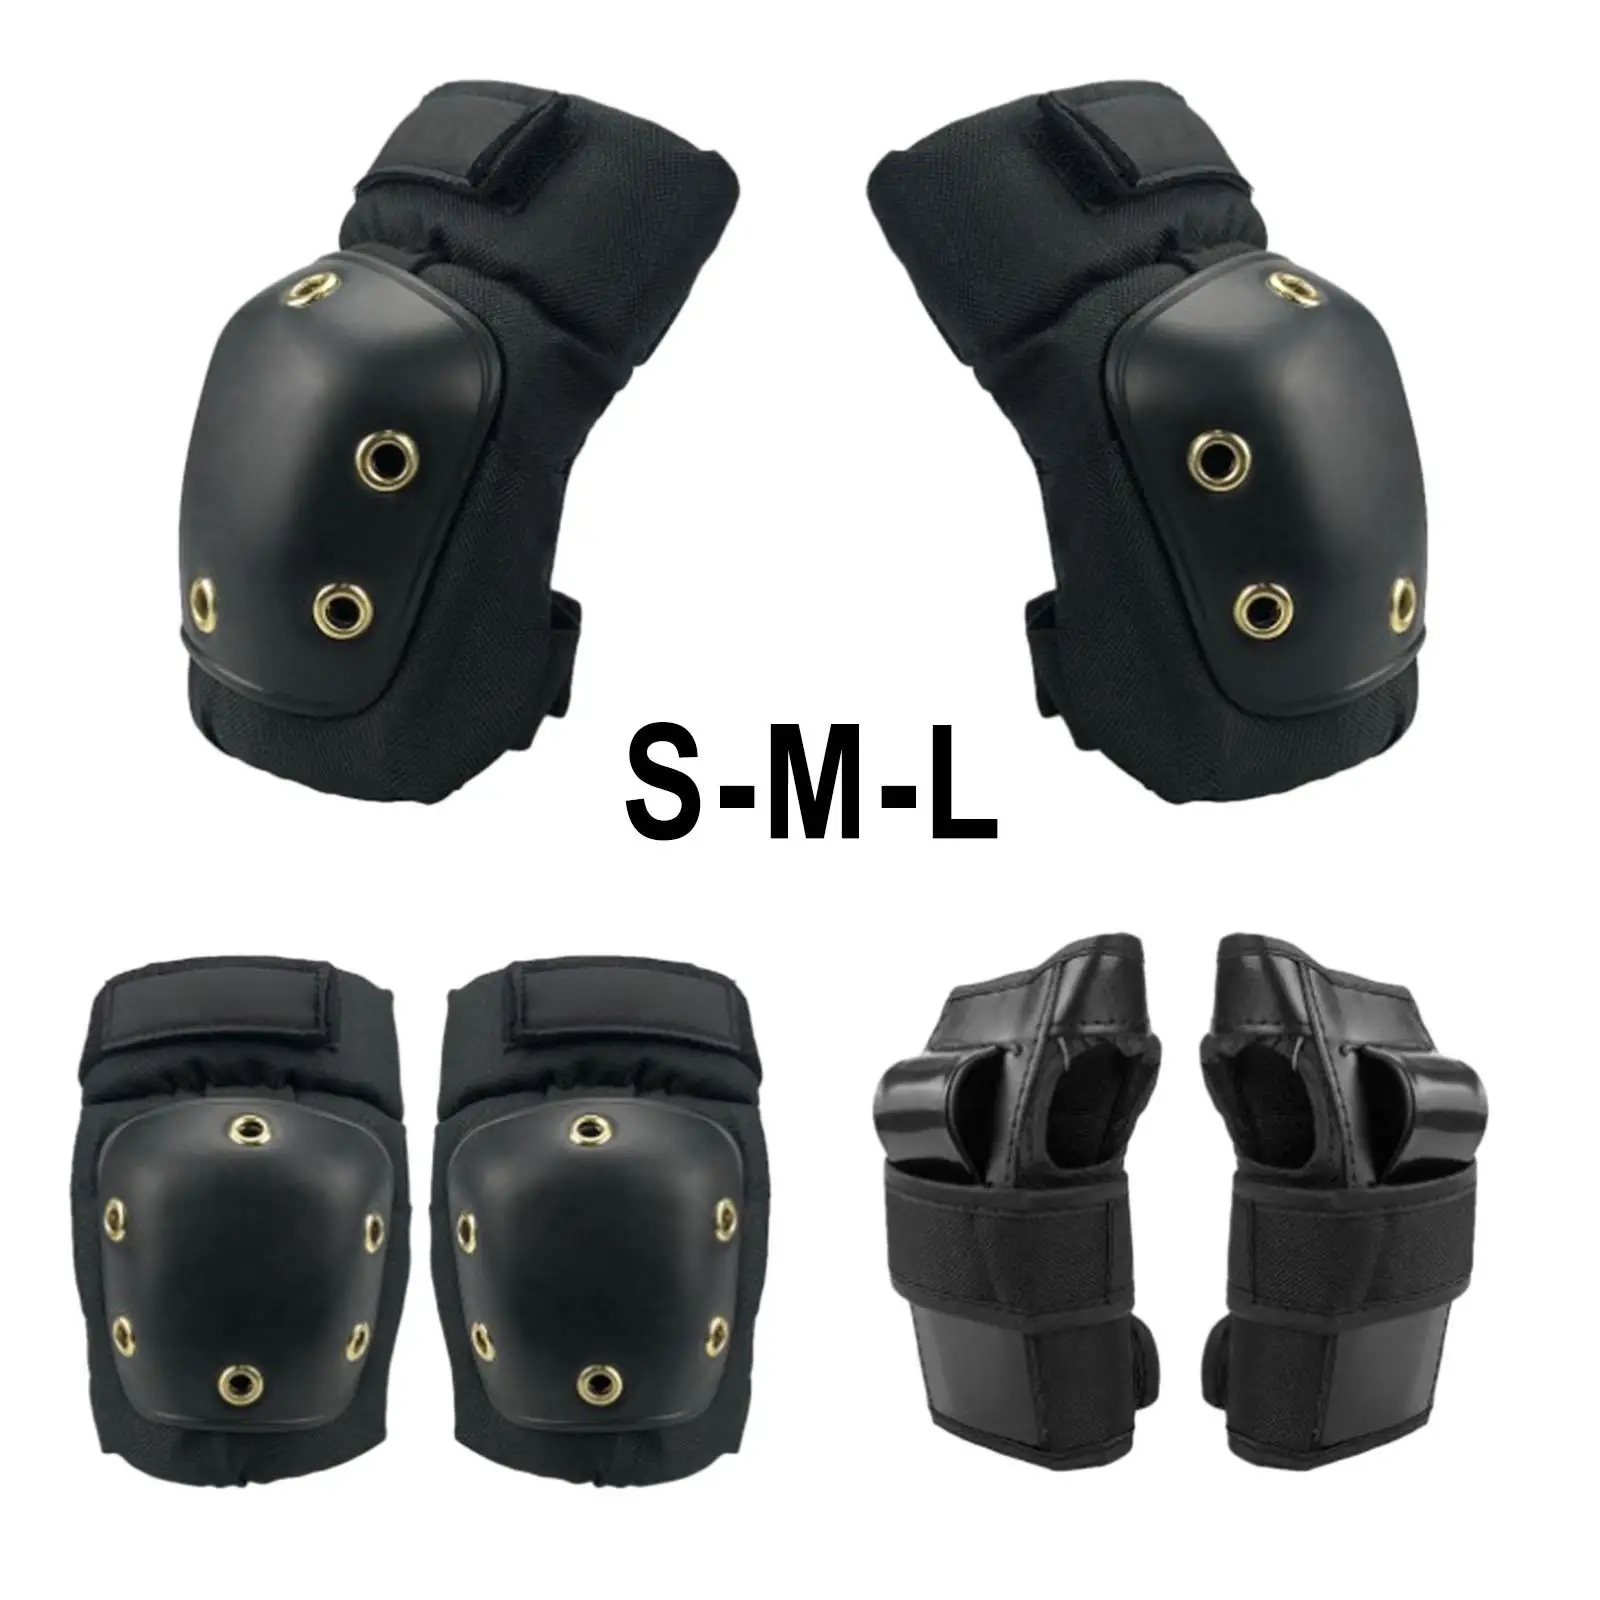 multifunctional Elbow and Knee Pads Wrist Guards Protective Gear for Children Skateboard Roller Skating Outdoor Cycling Riding